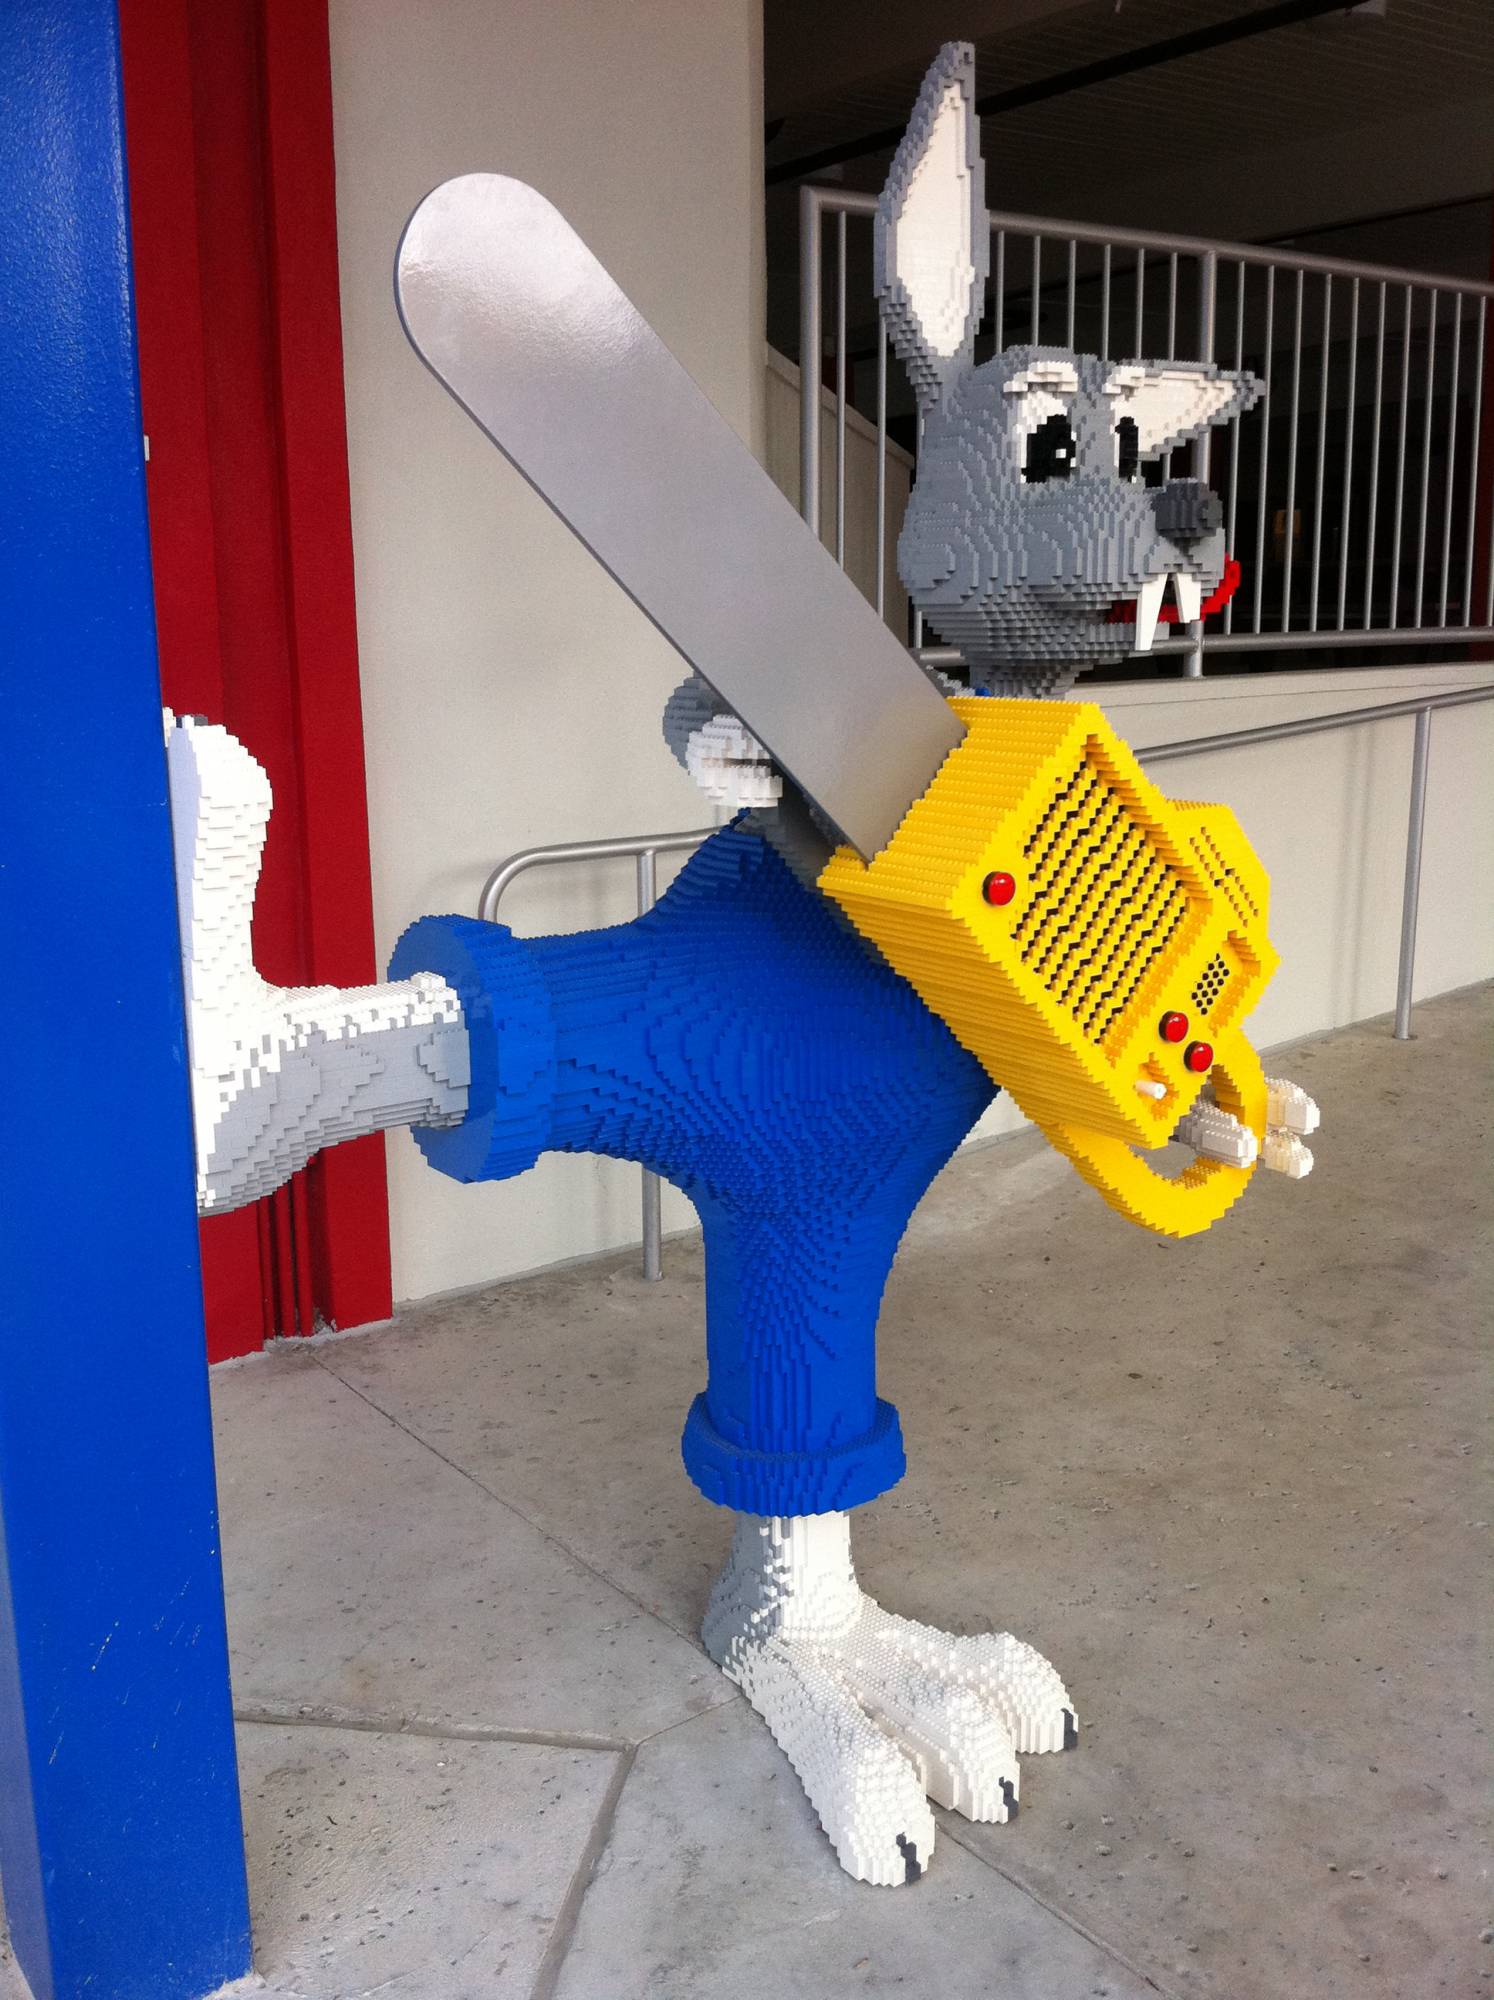 Bunny with a Chain Saw at LEGOLAND Florida